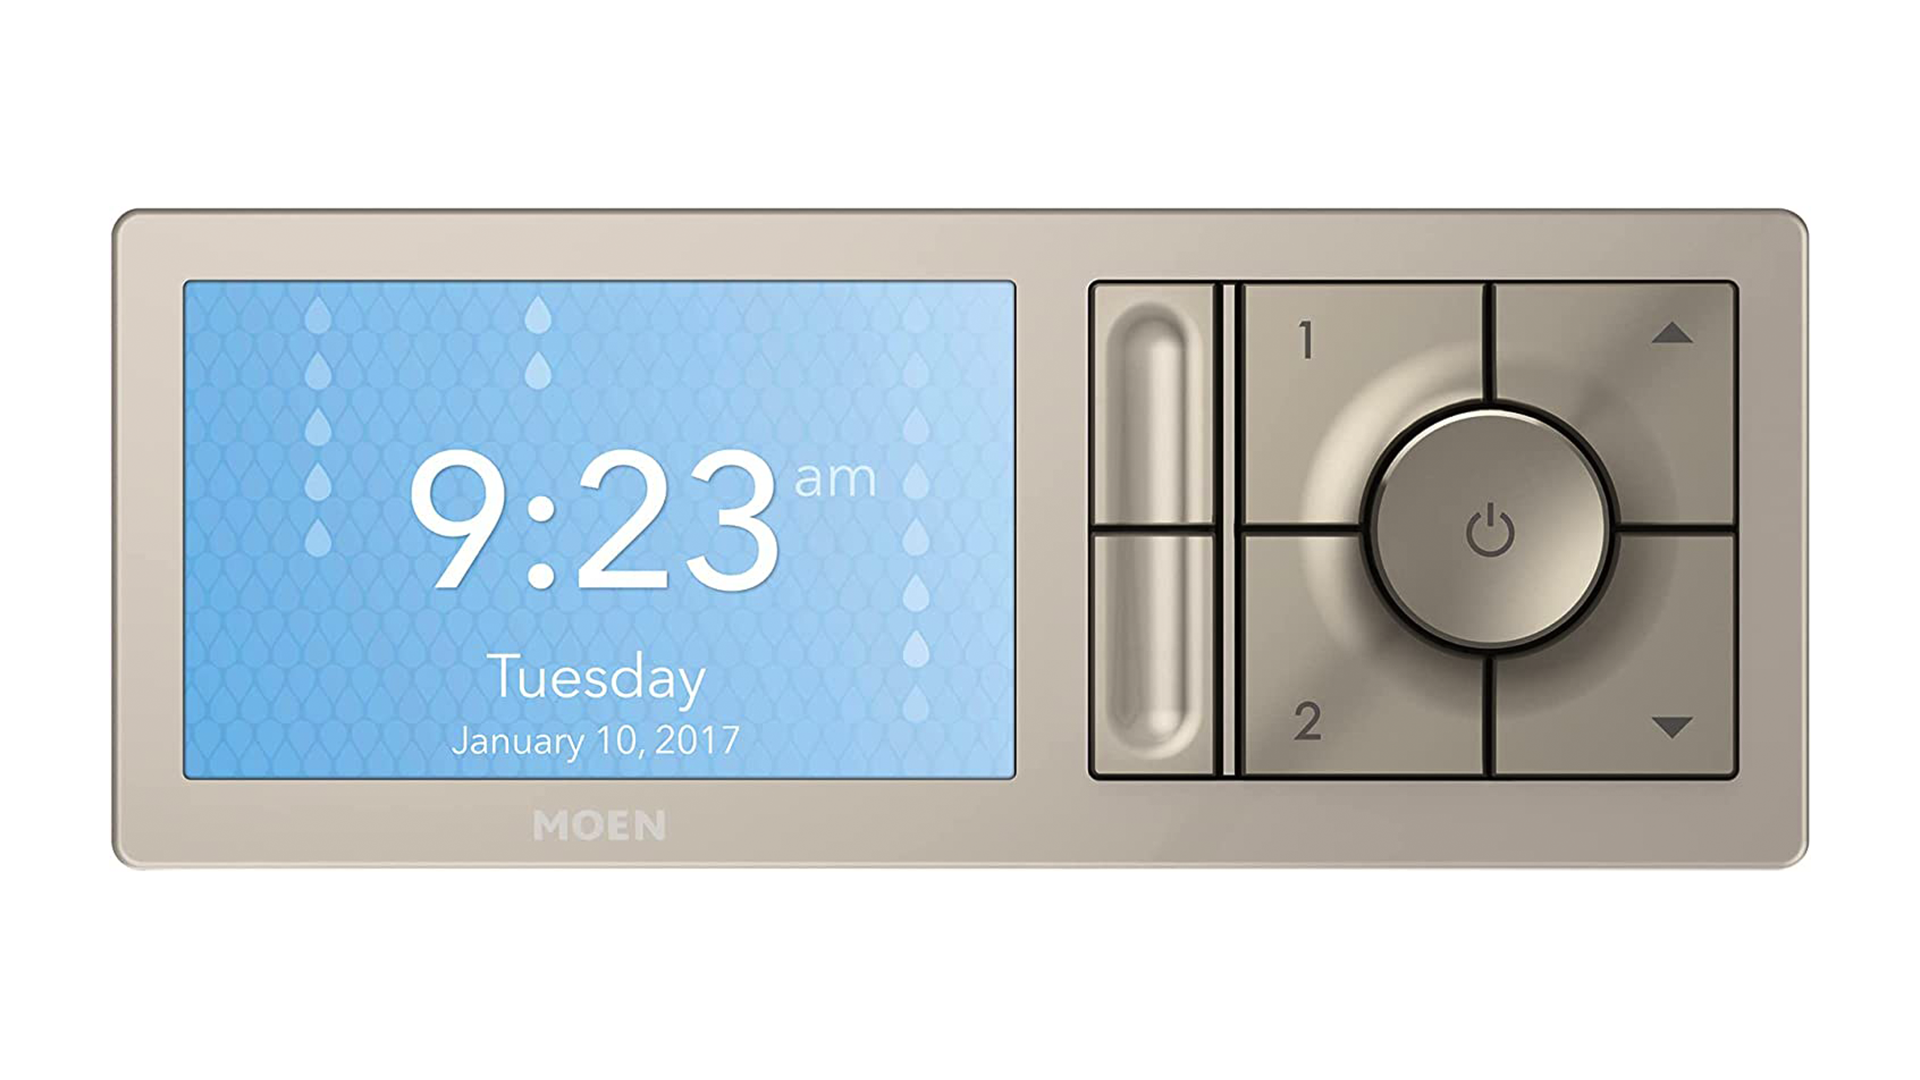 Moen Terra Smart Shower controller. It has a small display and several buttons.